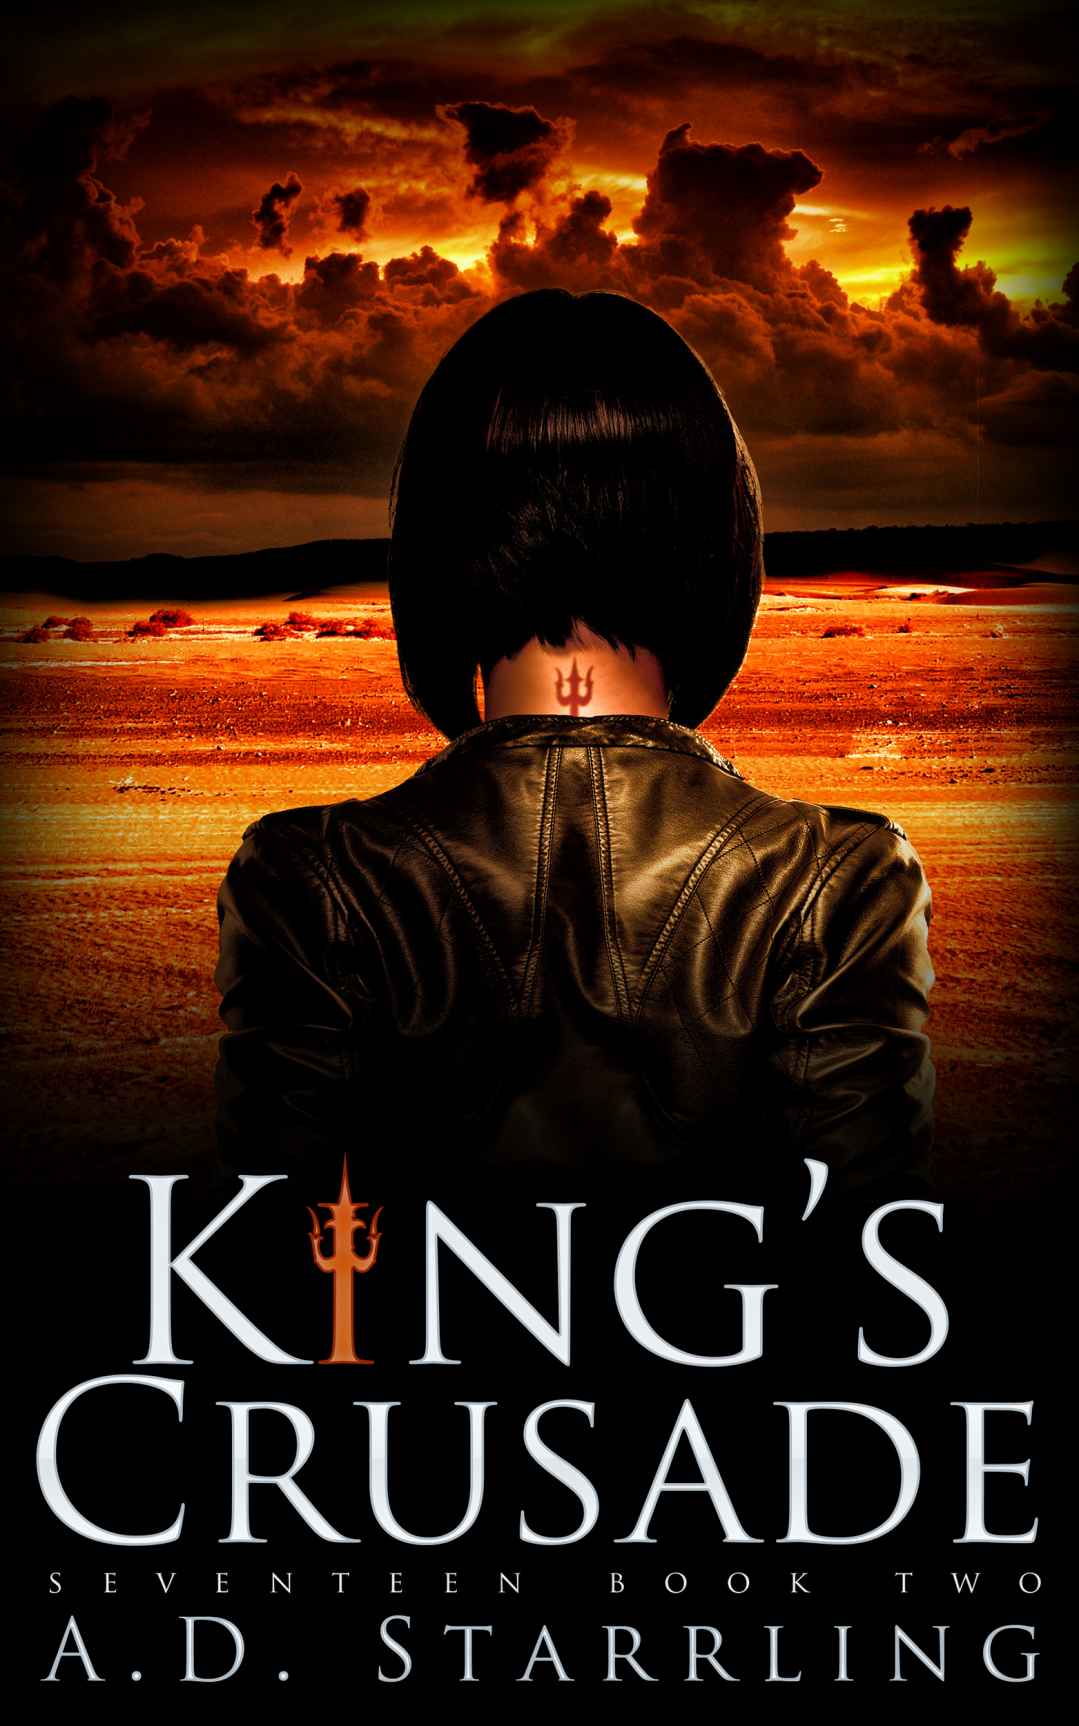 King's Crusade (Seventeen) by Starrling, AD